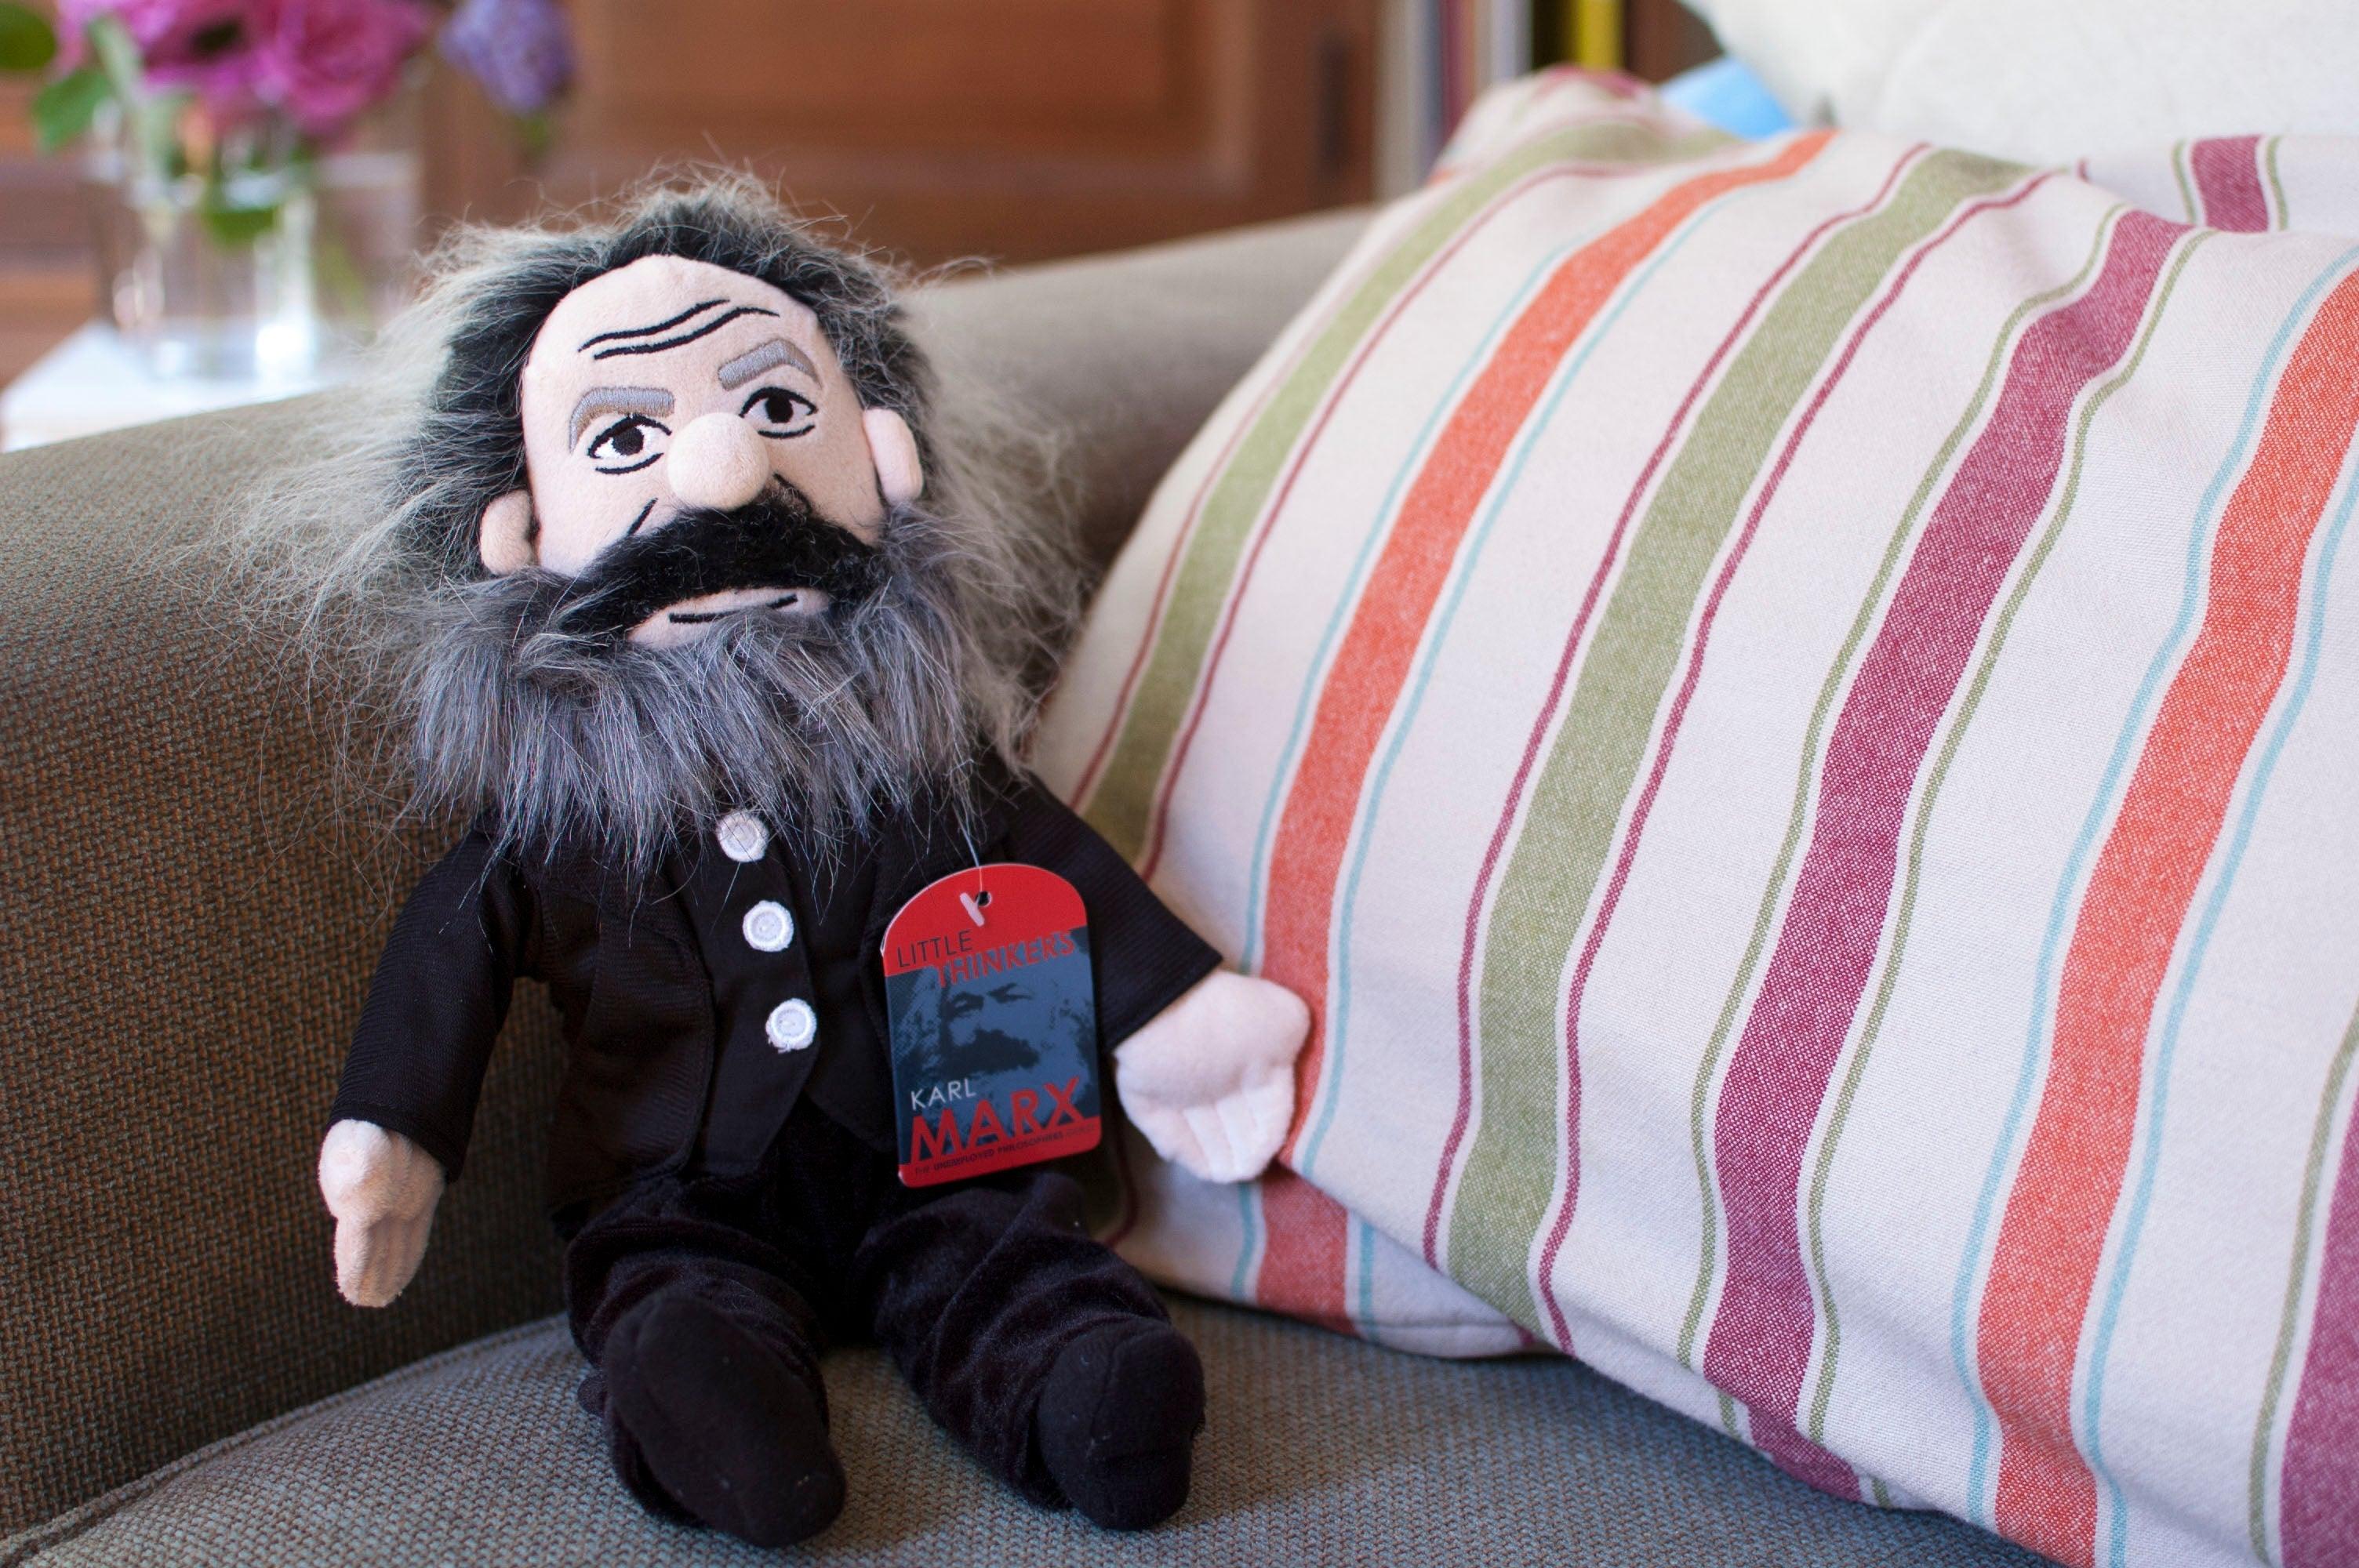 Product photo of Karl Marx Plush Doll, a novelty gift manufactured by The Unemployed Philosophers Guild.